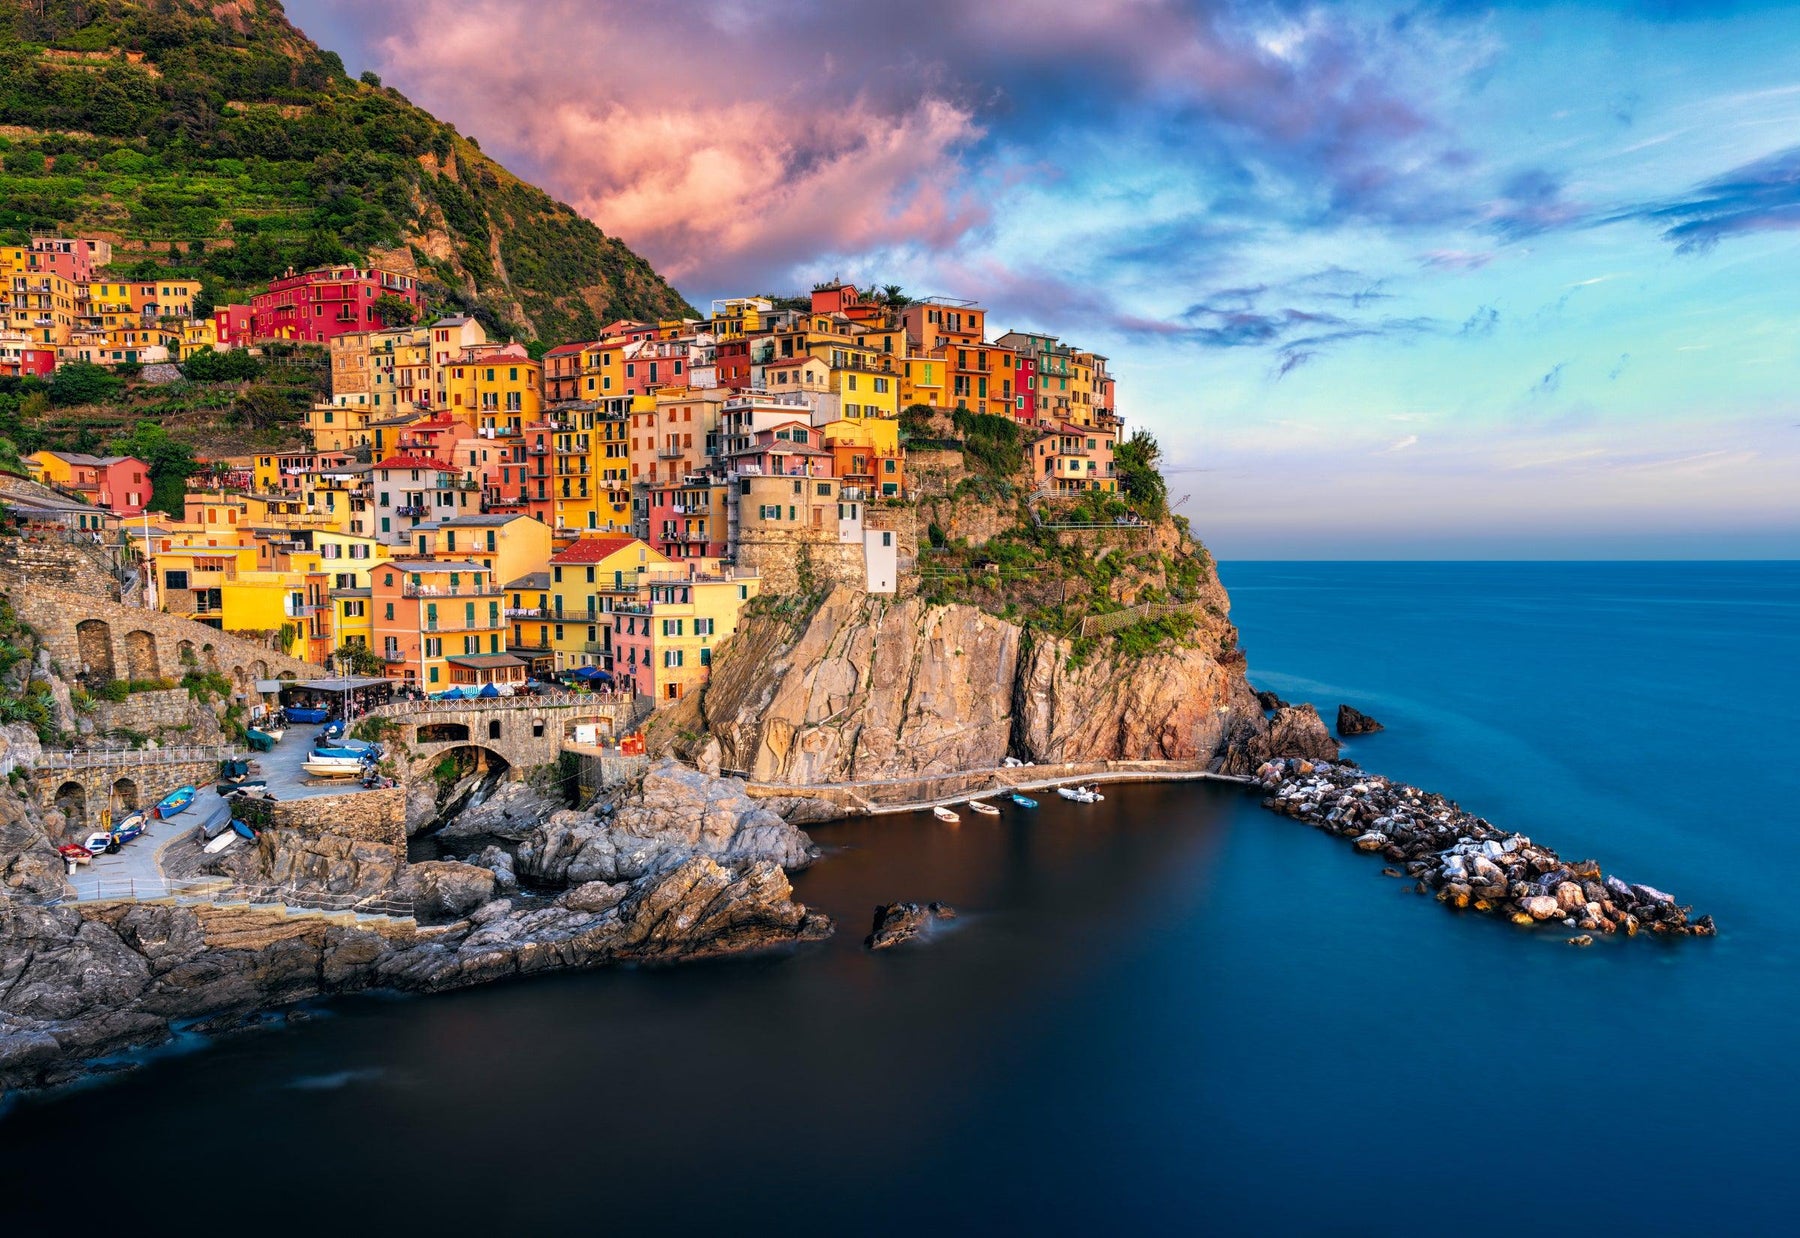 Colorful painted buildings of Manarola Italy built on a cliff overlooking the ocean at sunset